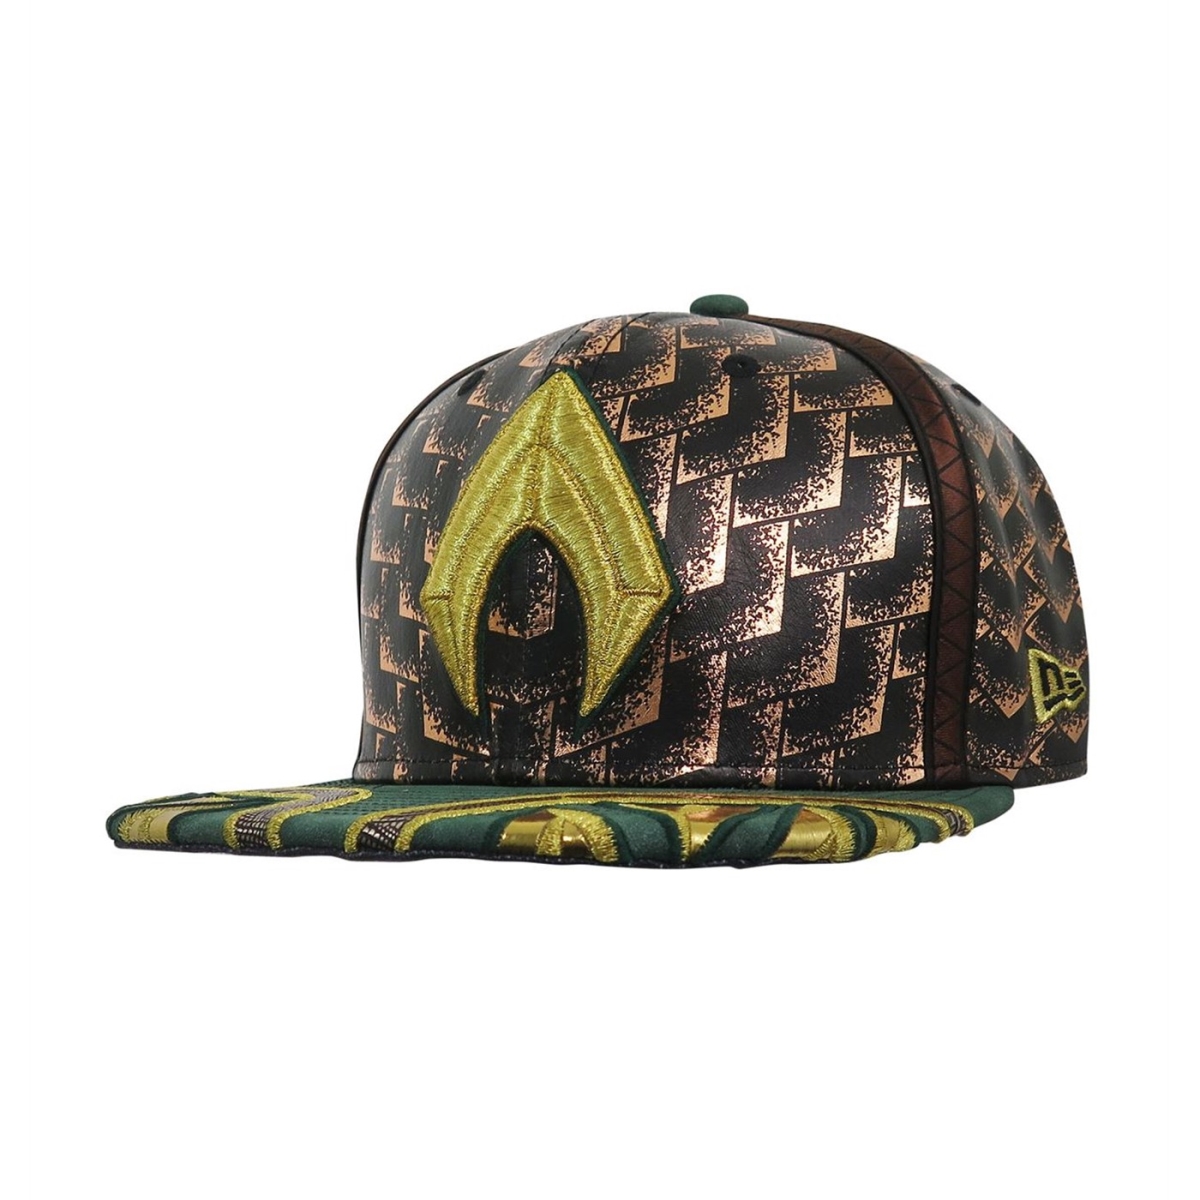 Picture of Aquaman hataquajlarm5950-718-7 1-8 Fitted Aquaman Justice League Armor 59Fifty Fitted Hat - Size 7.125